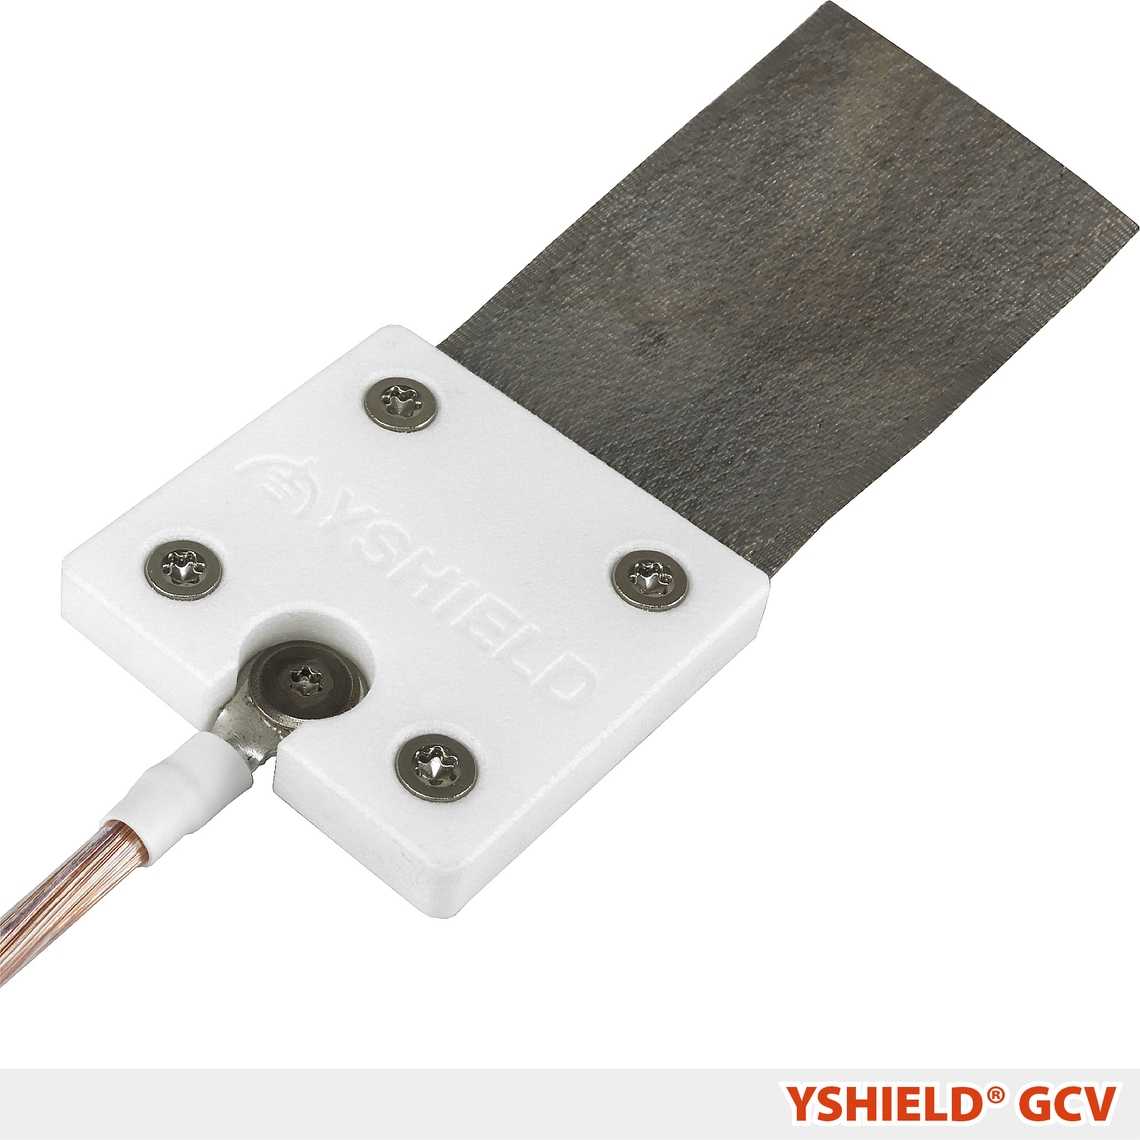 YSHIELD® GCV | Grounding connection hook and loop